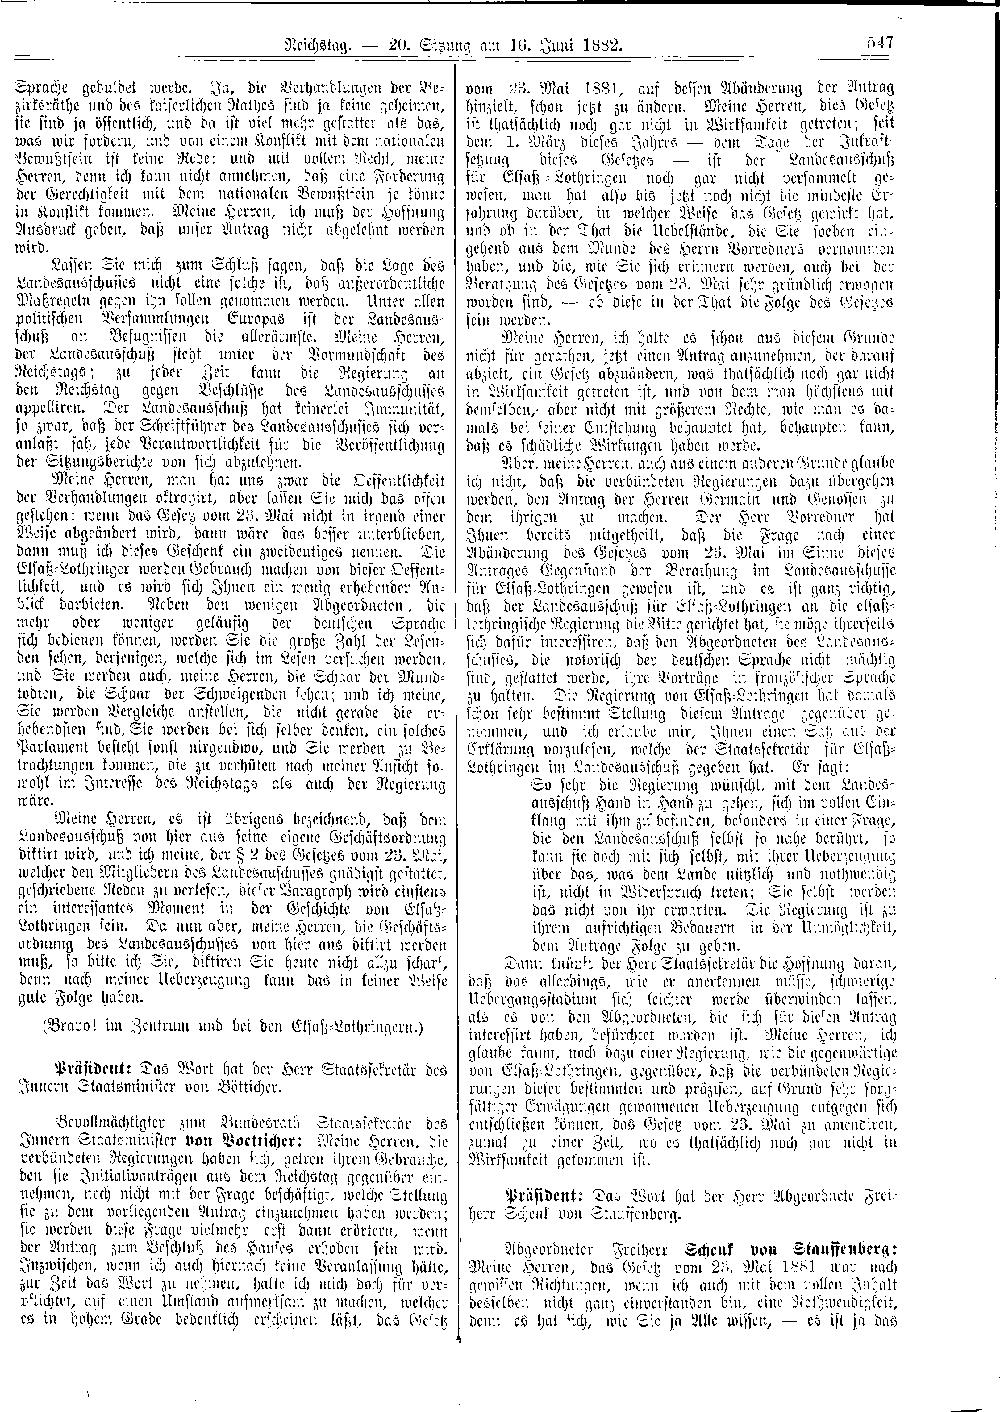 Scan of page 547